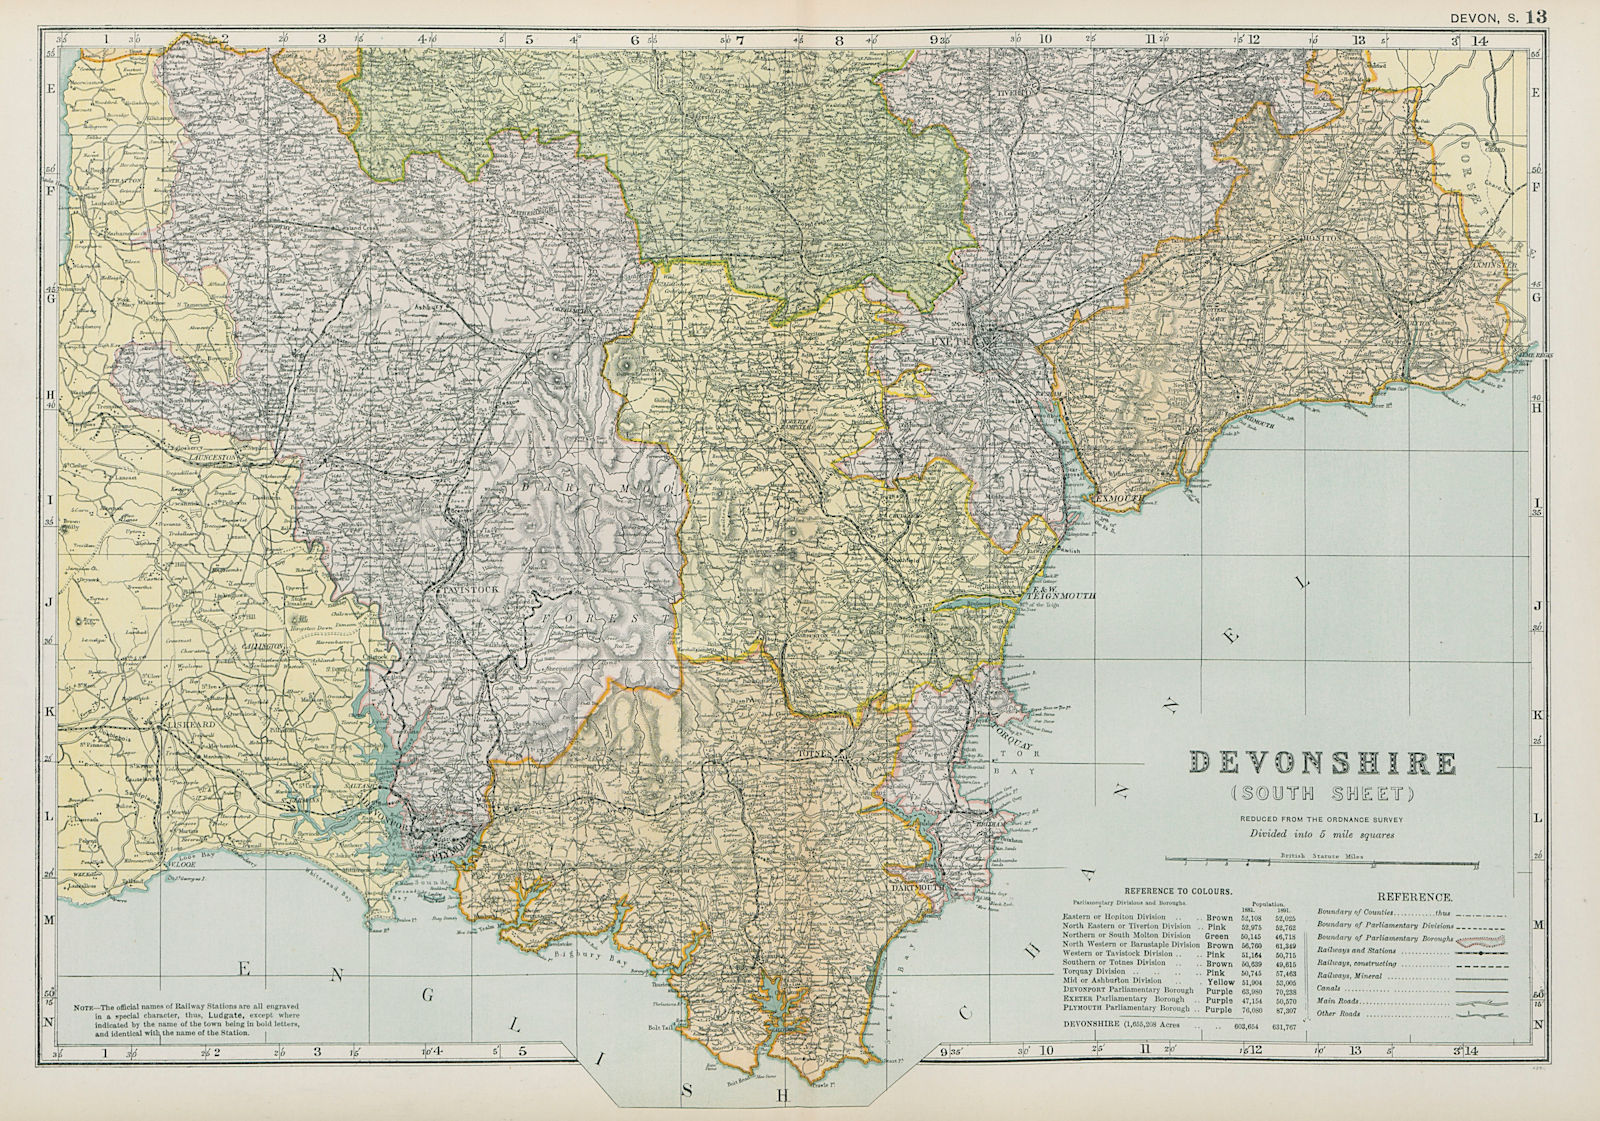 DEVONSHIRE (SOUTH) . Parliamentary divisions. Parks. Devon. BACON 1900 old map